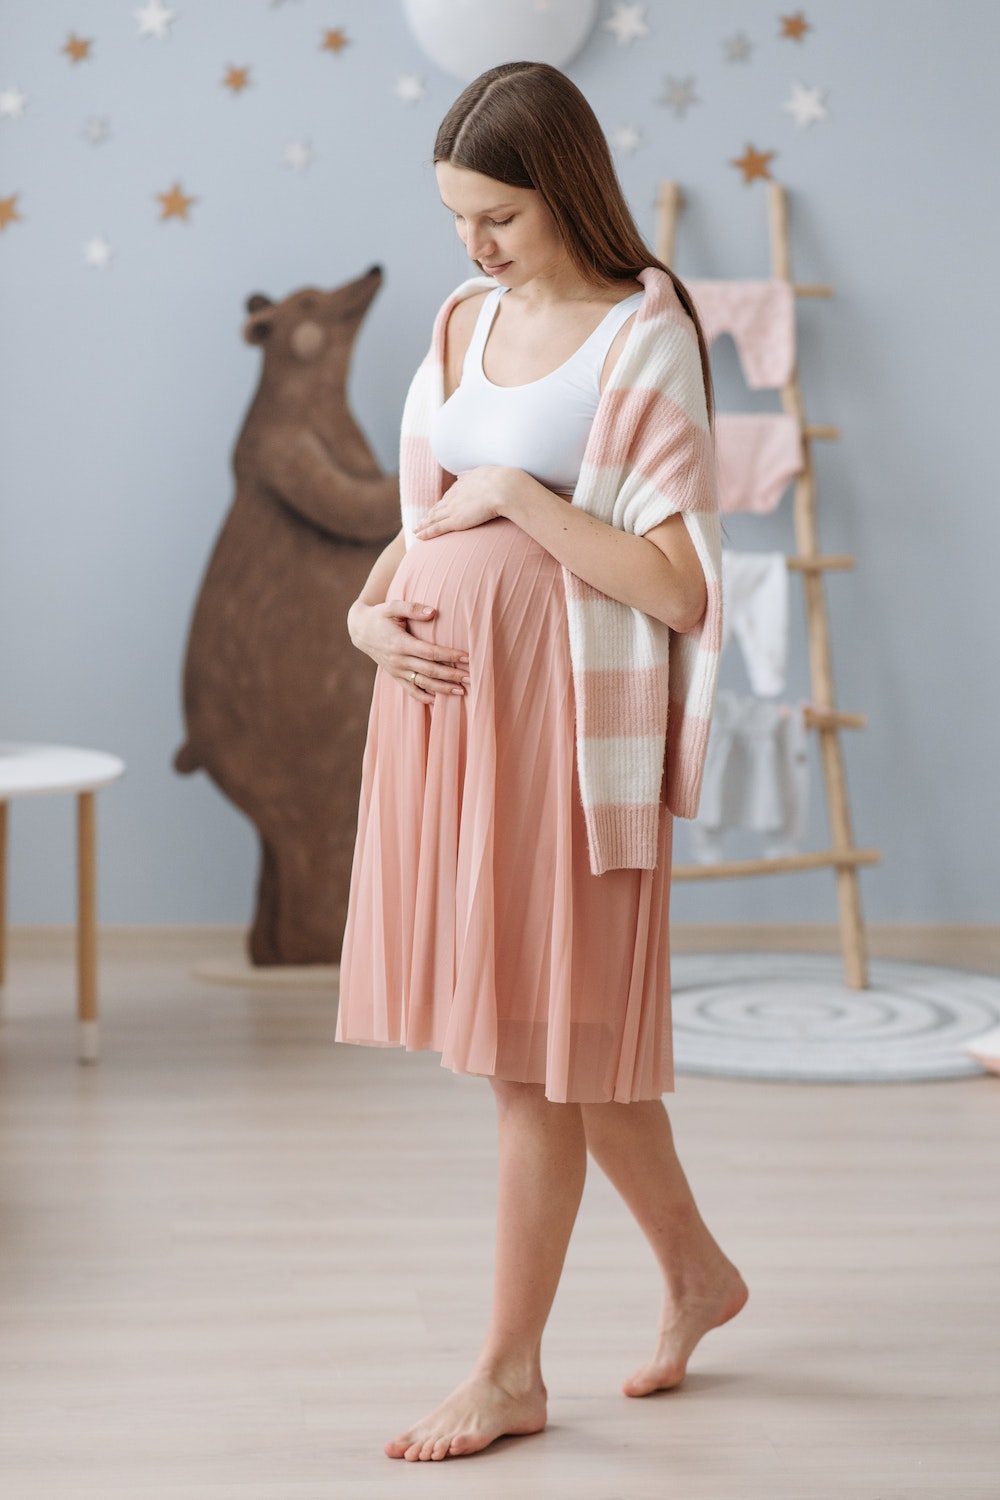 Petite maternity outfits stylish and comfortable